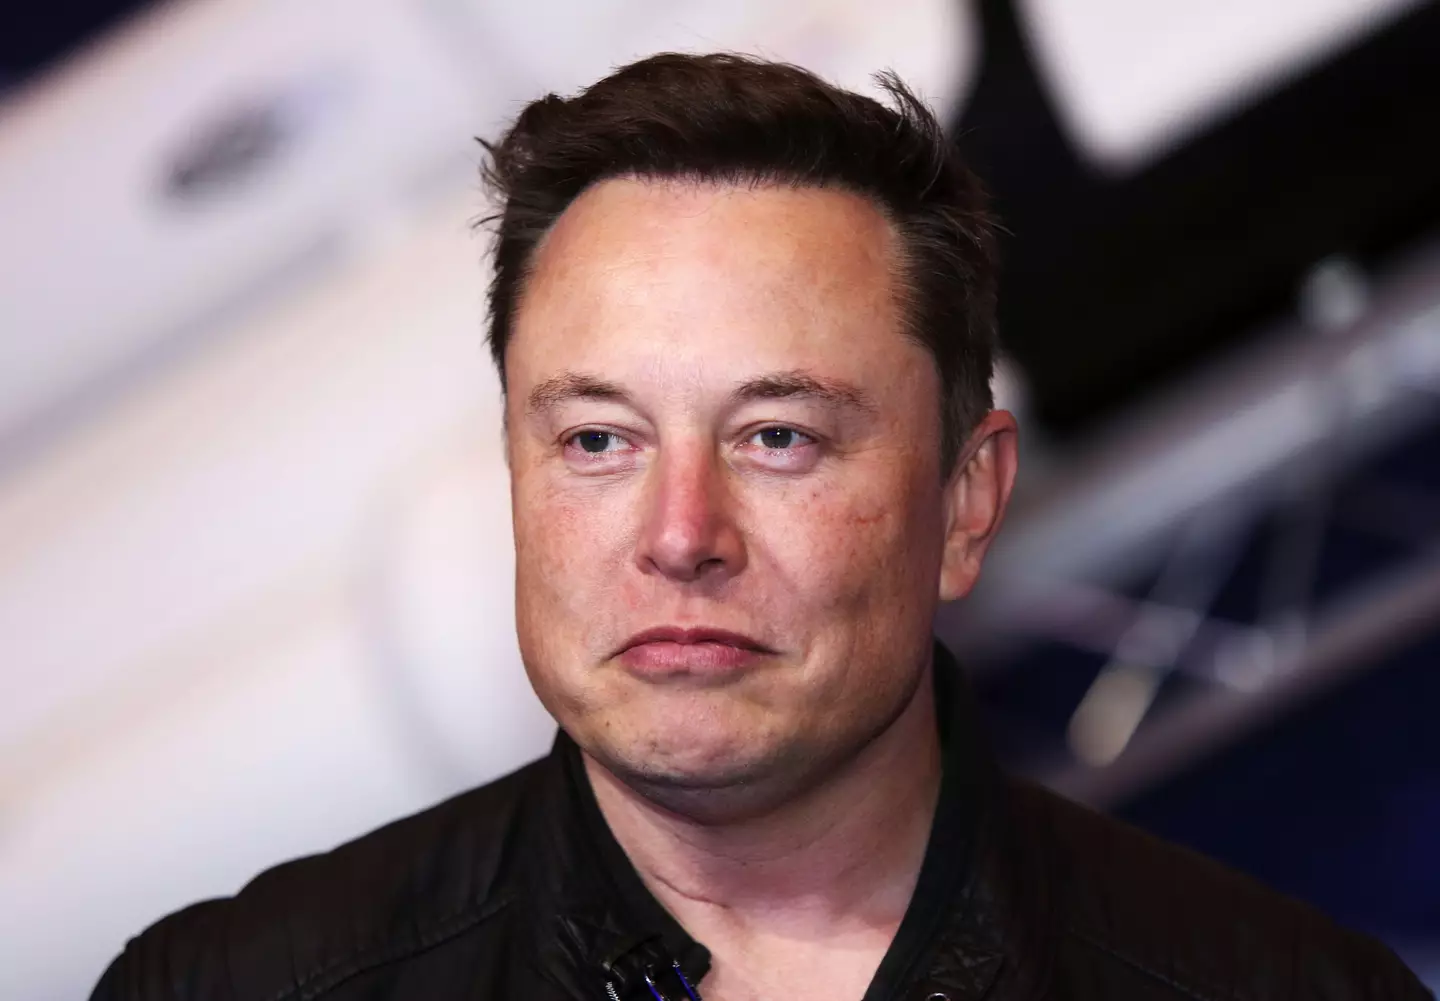 Musk is now countersuing Twitter.